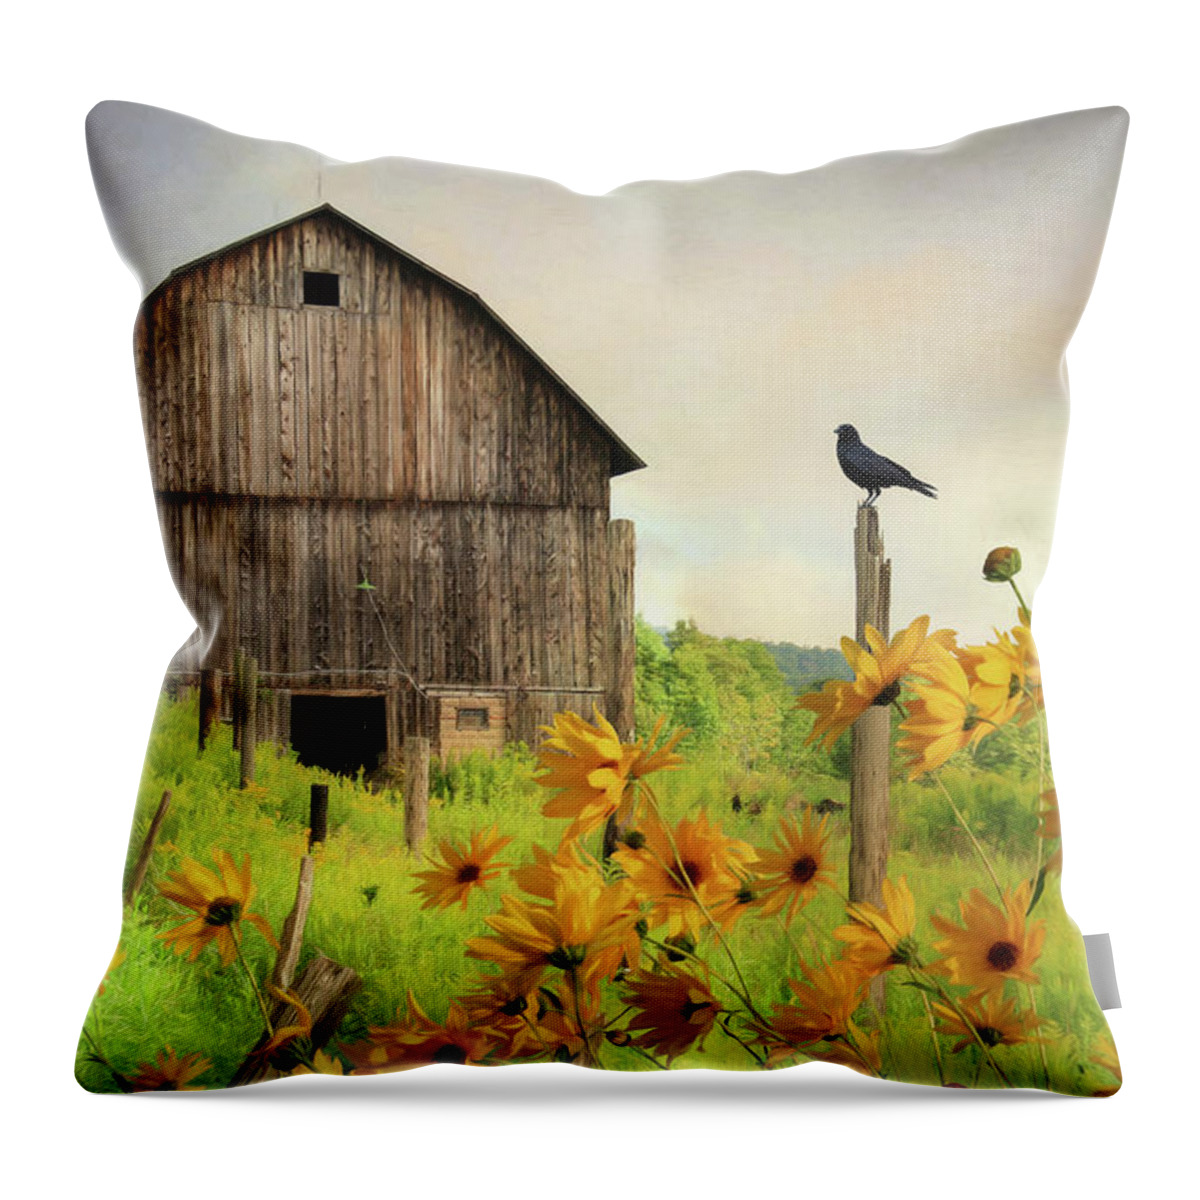 Barn Throw Pillow featuring the photograph Bradford County Wildflowers by Lori Deiter